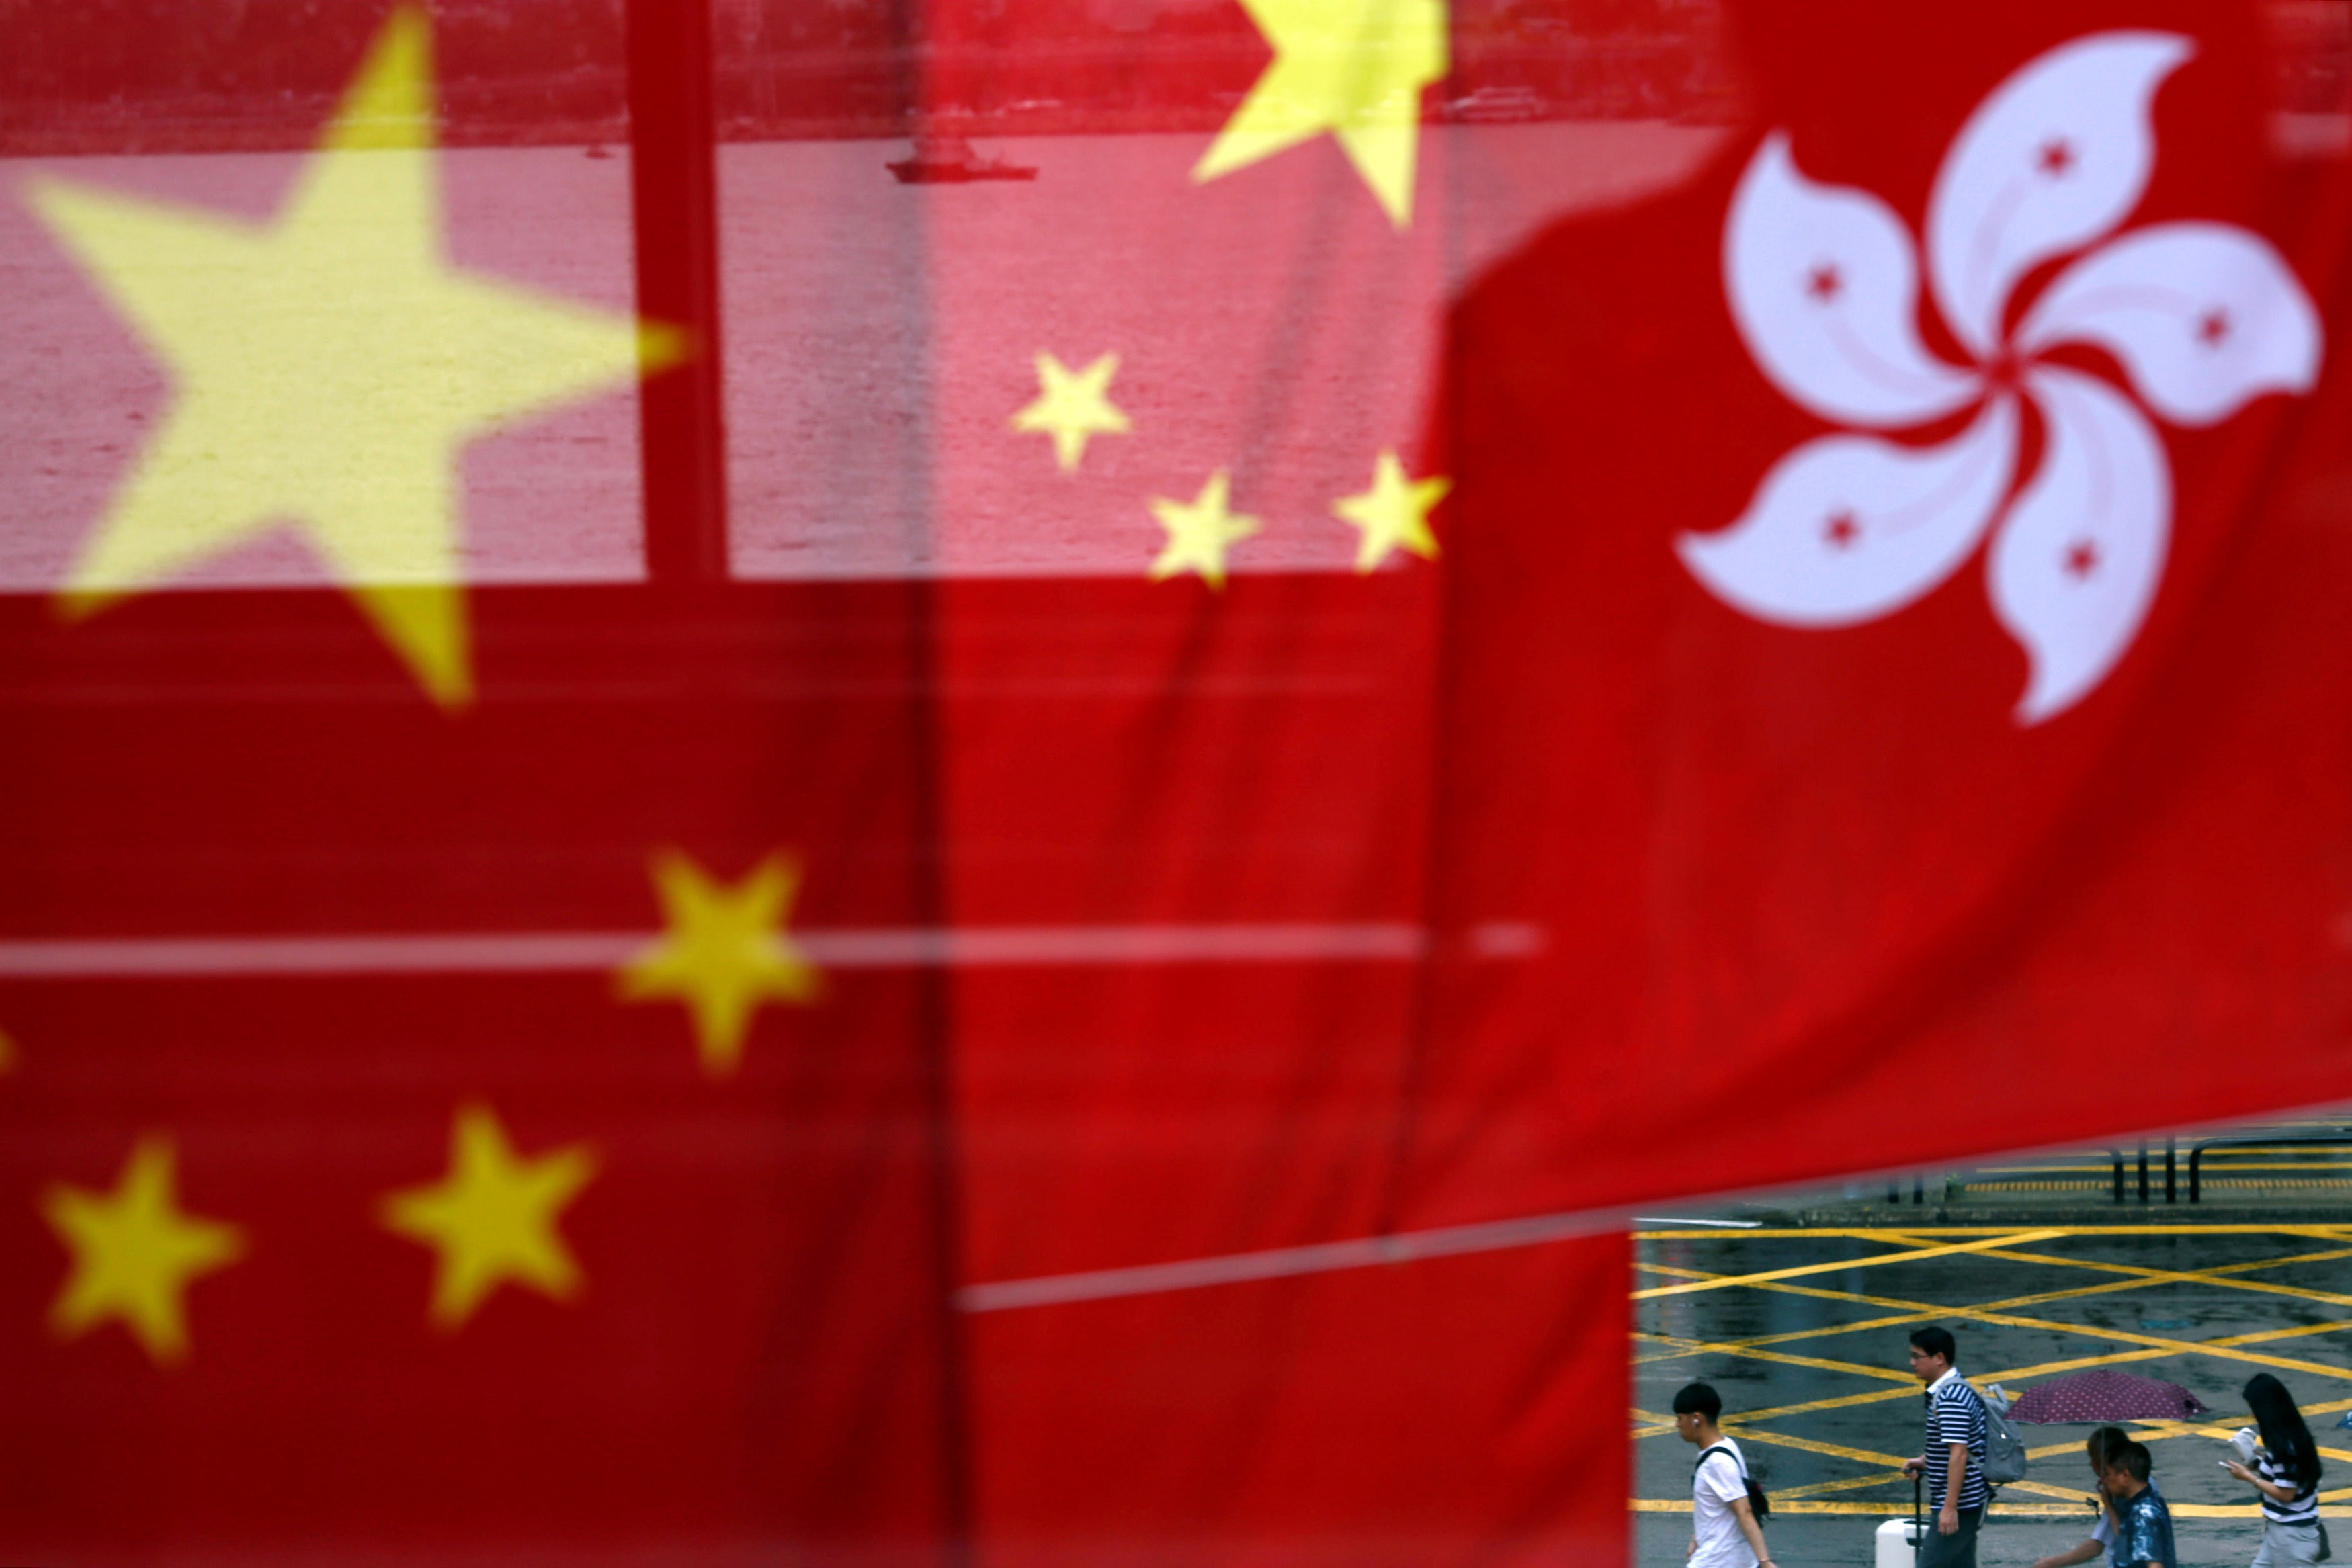 Beijing is losing its campaign to win the hearts and minds of Hong Kong people as badly as it lost the opium wars. Photo: Reuters